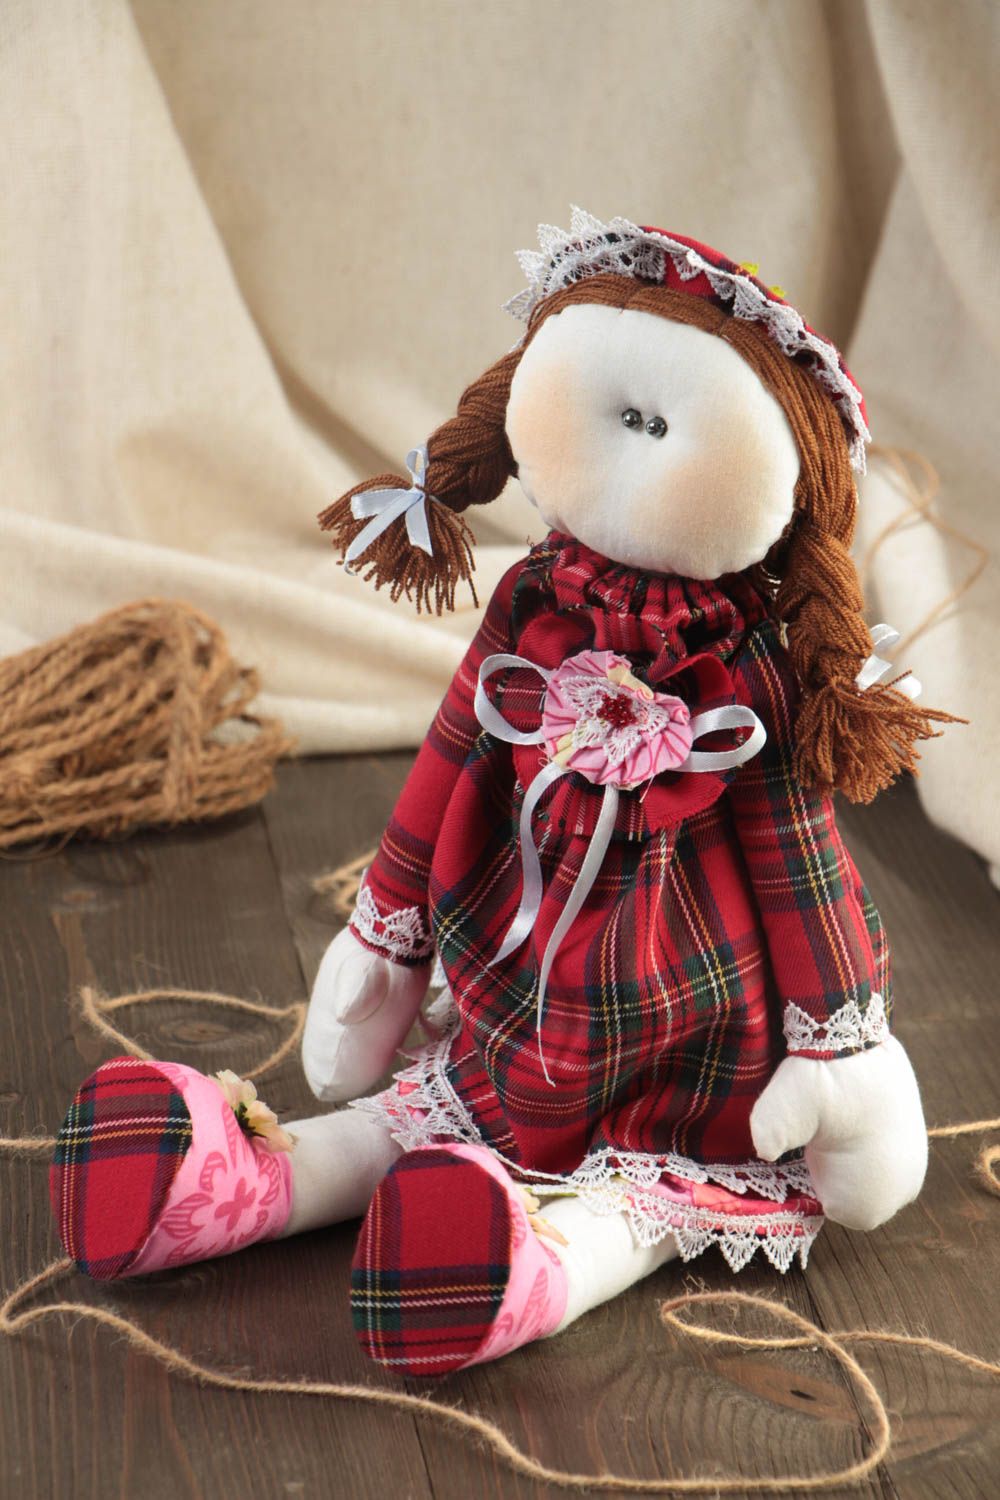 Beautiful handmade fabric soft doll girl with braids for children and decor photo 1